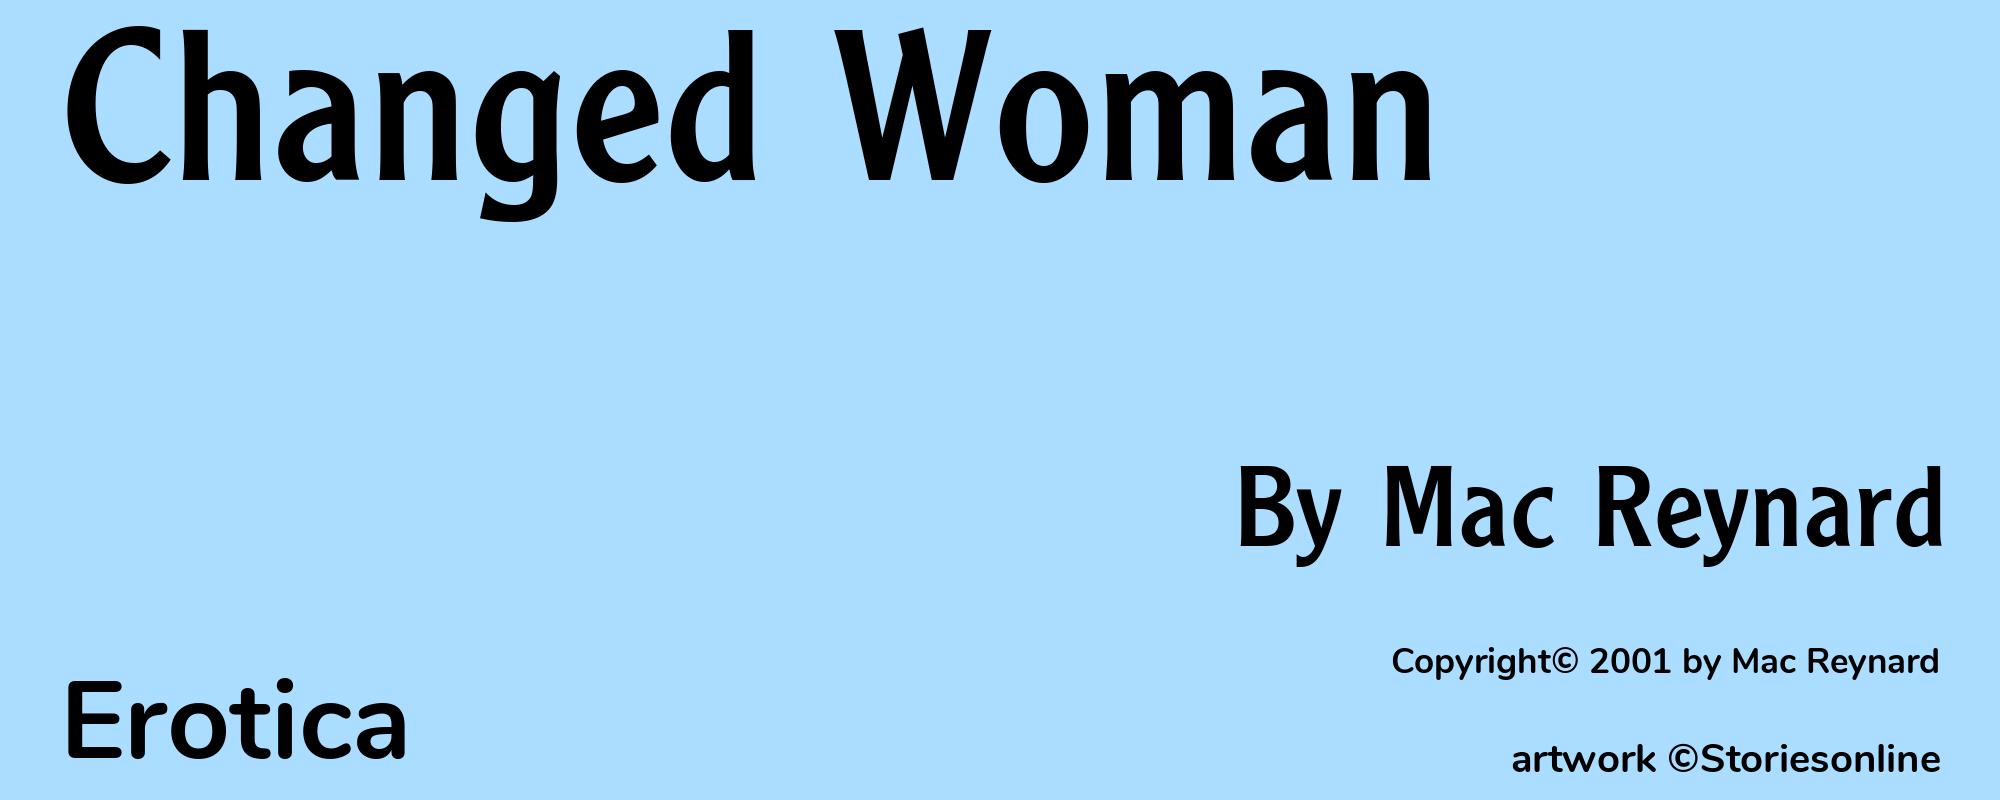 Changed Woman - Cover